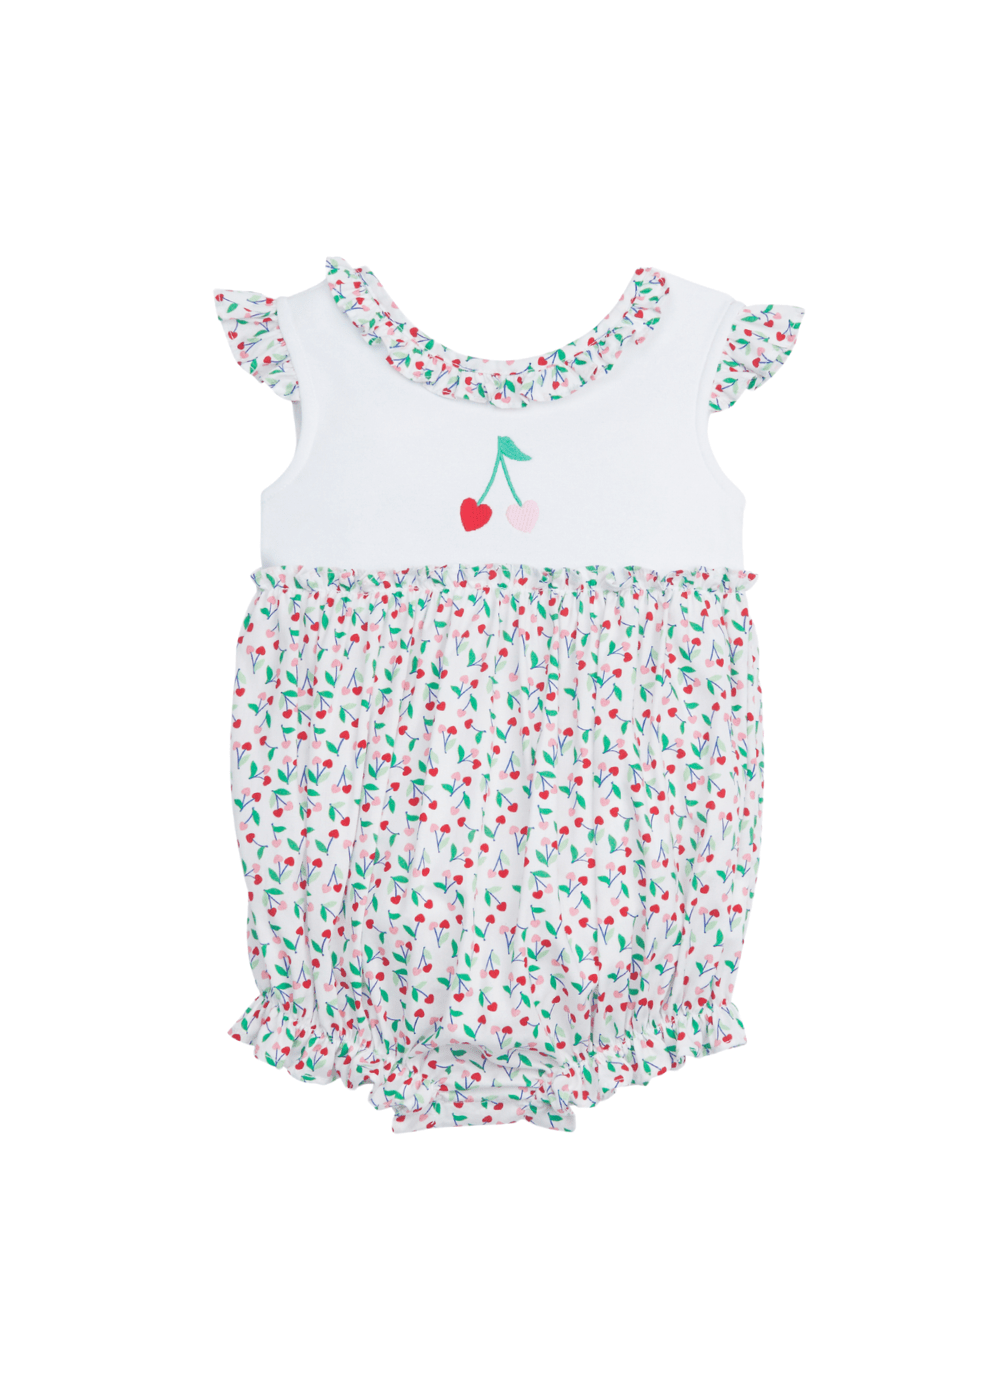 seguridadindustrialcr baby girl's bubble with cherry heart embroidery at the chest